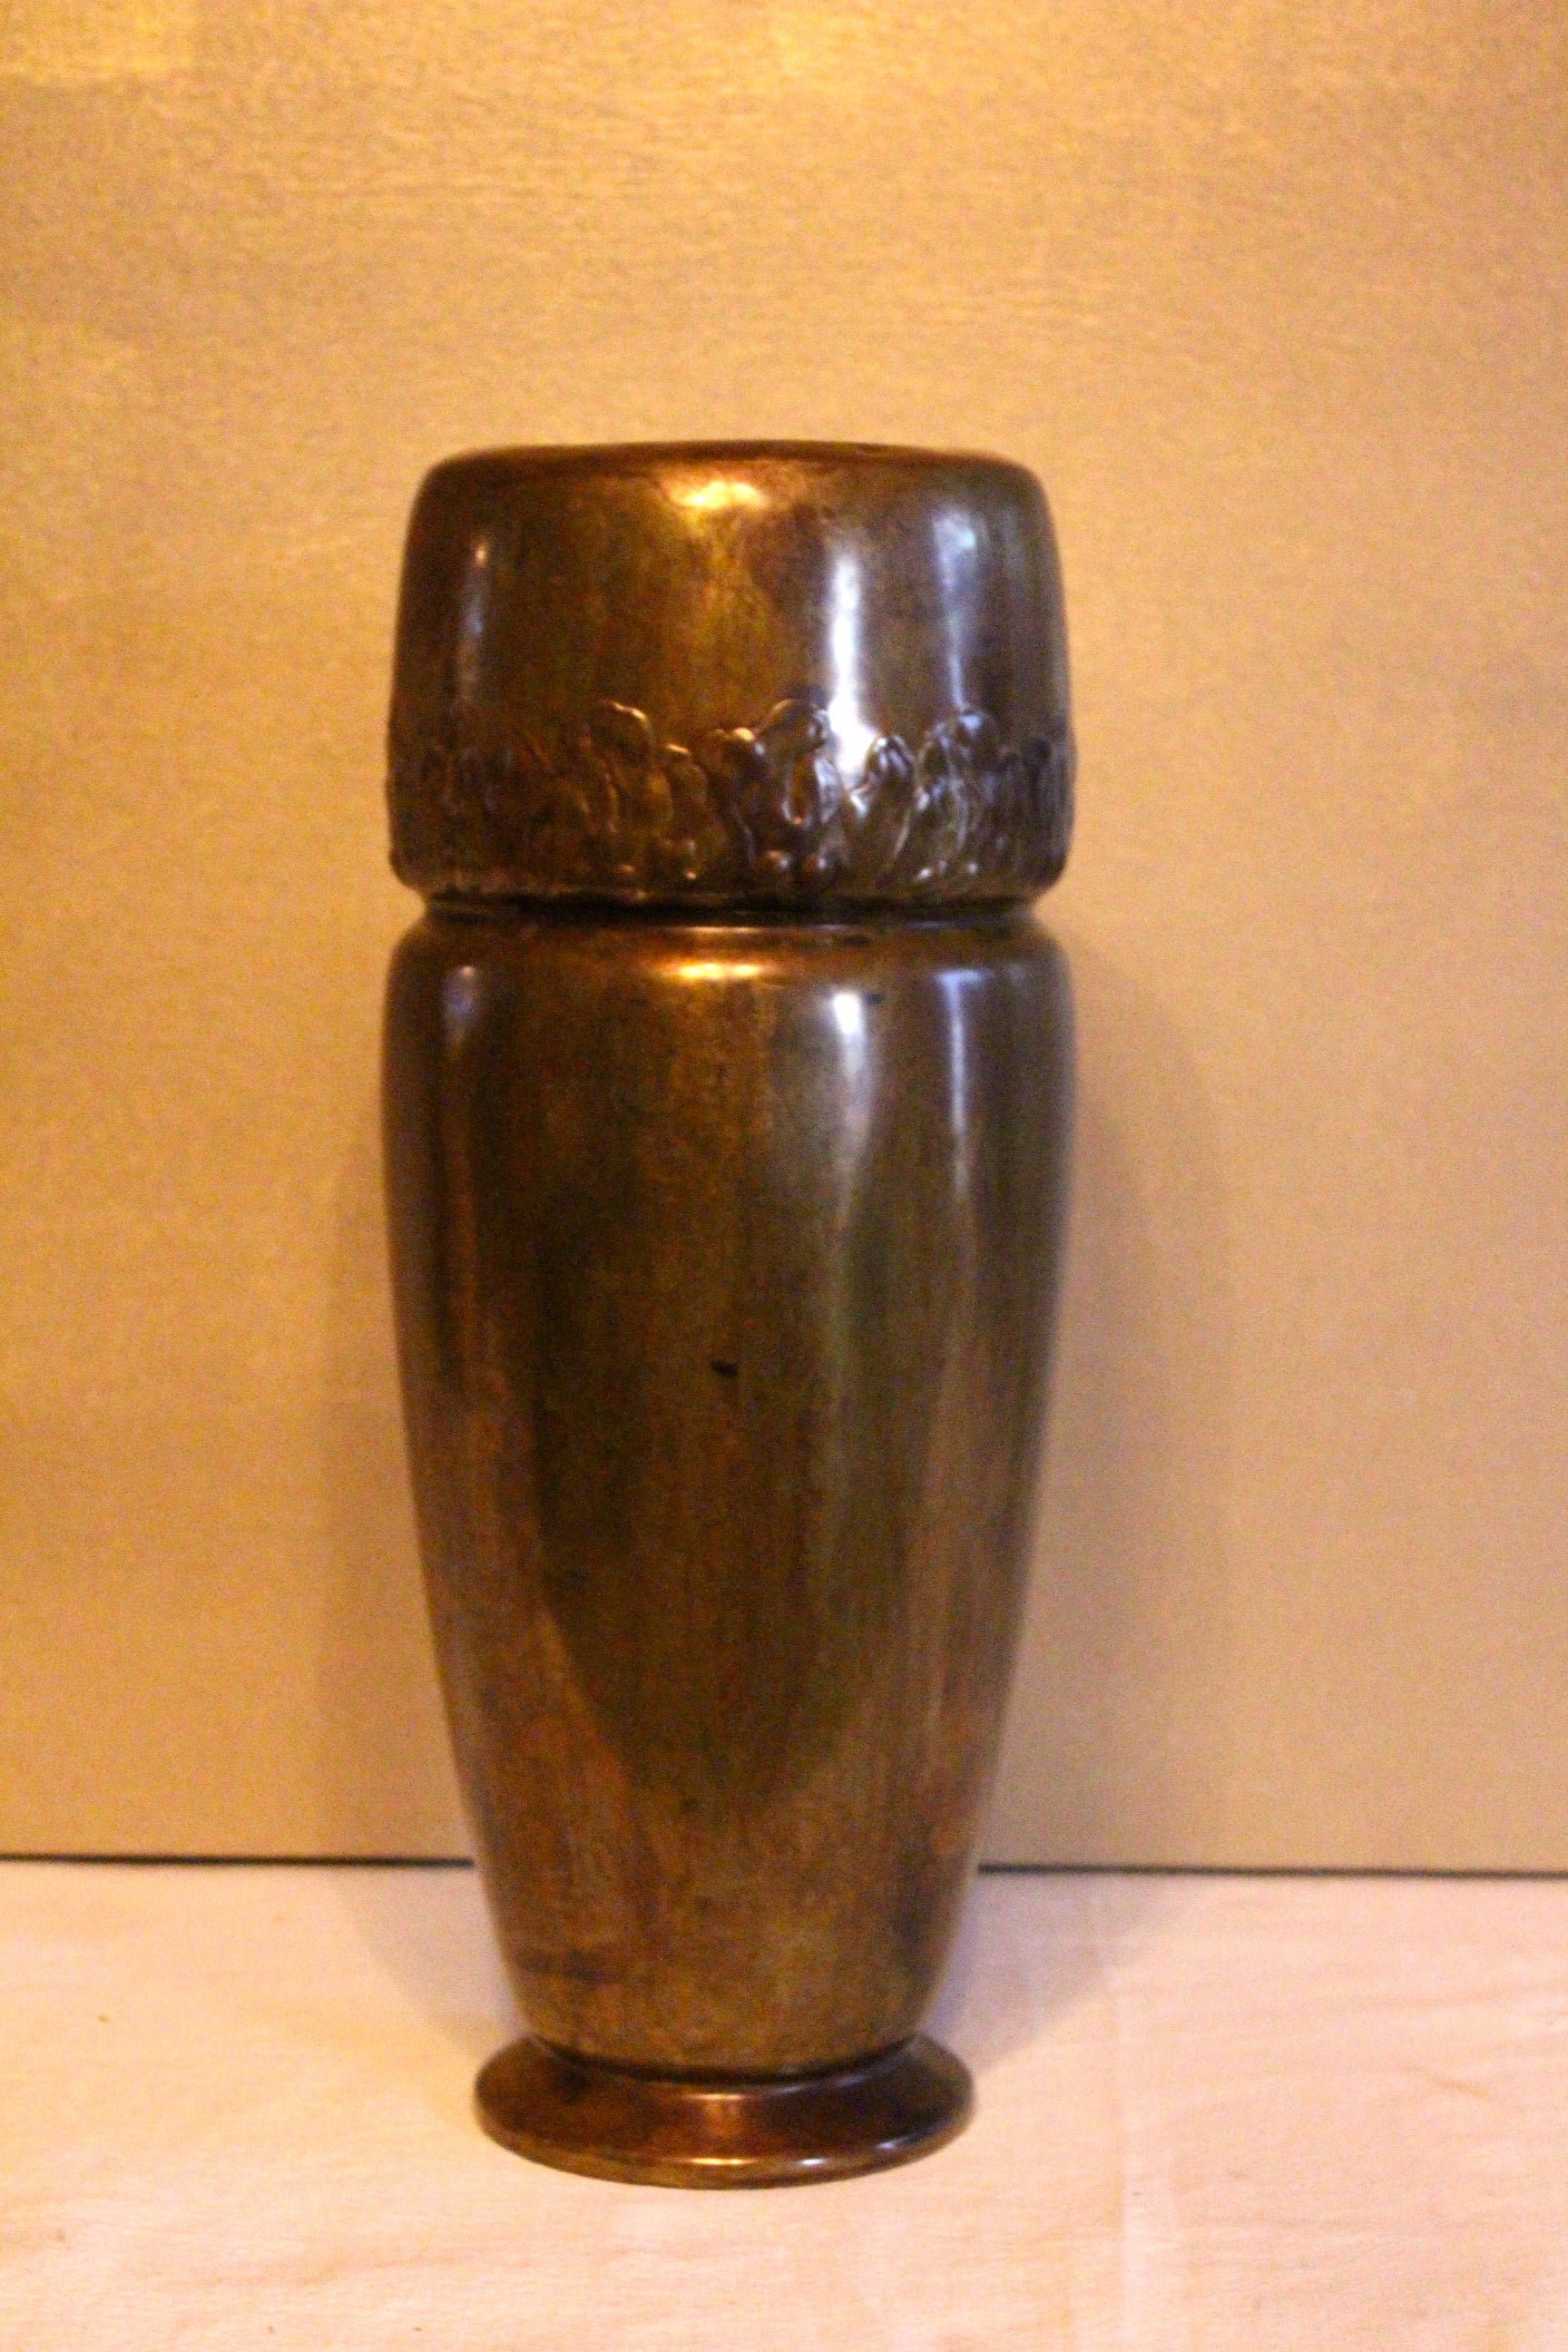 Monumental brass vase with detail - This piece is inscribed on one side in very small text - and very difficult to read with patina. 

Stunning brass patina and detailing.